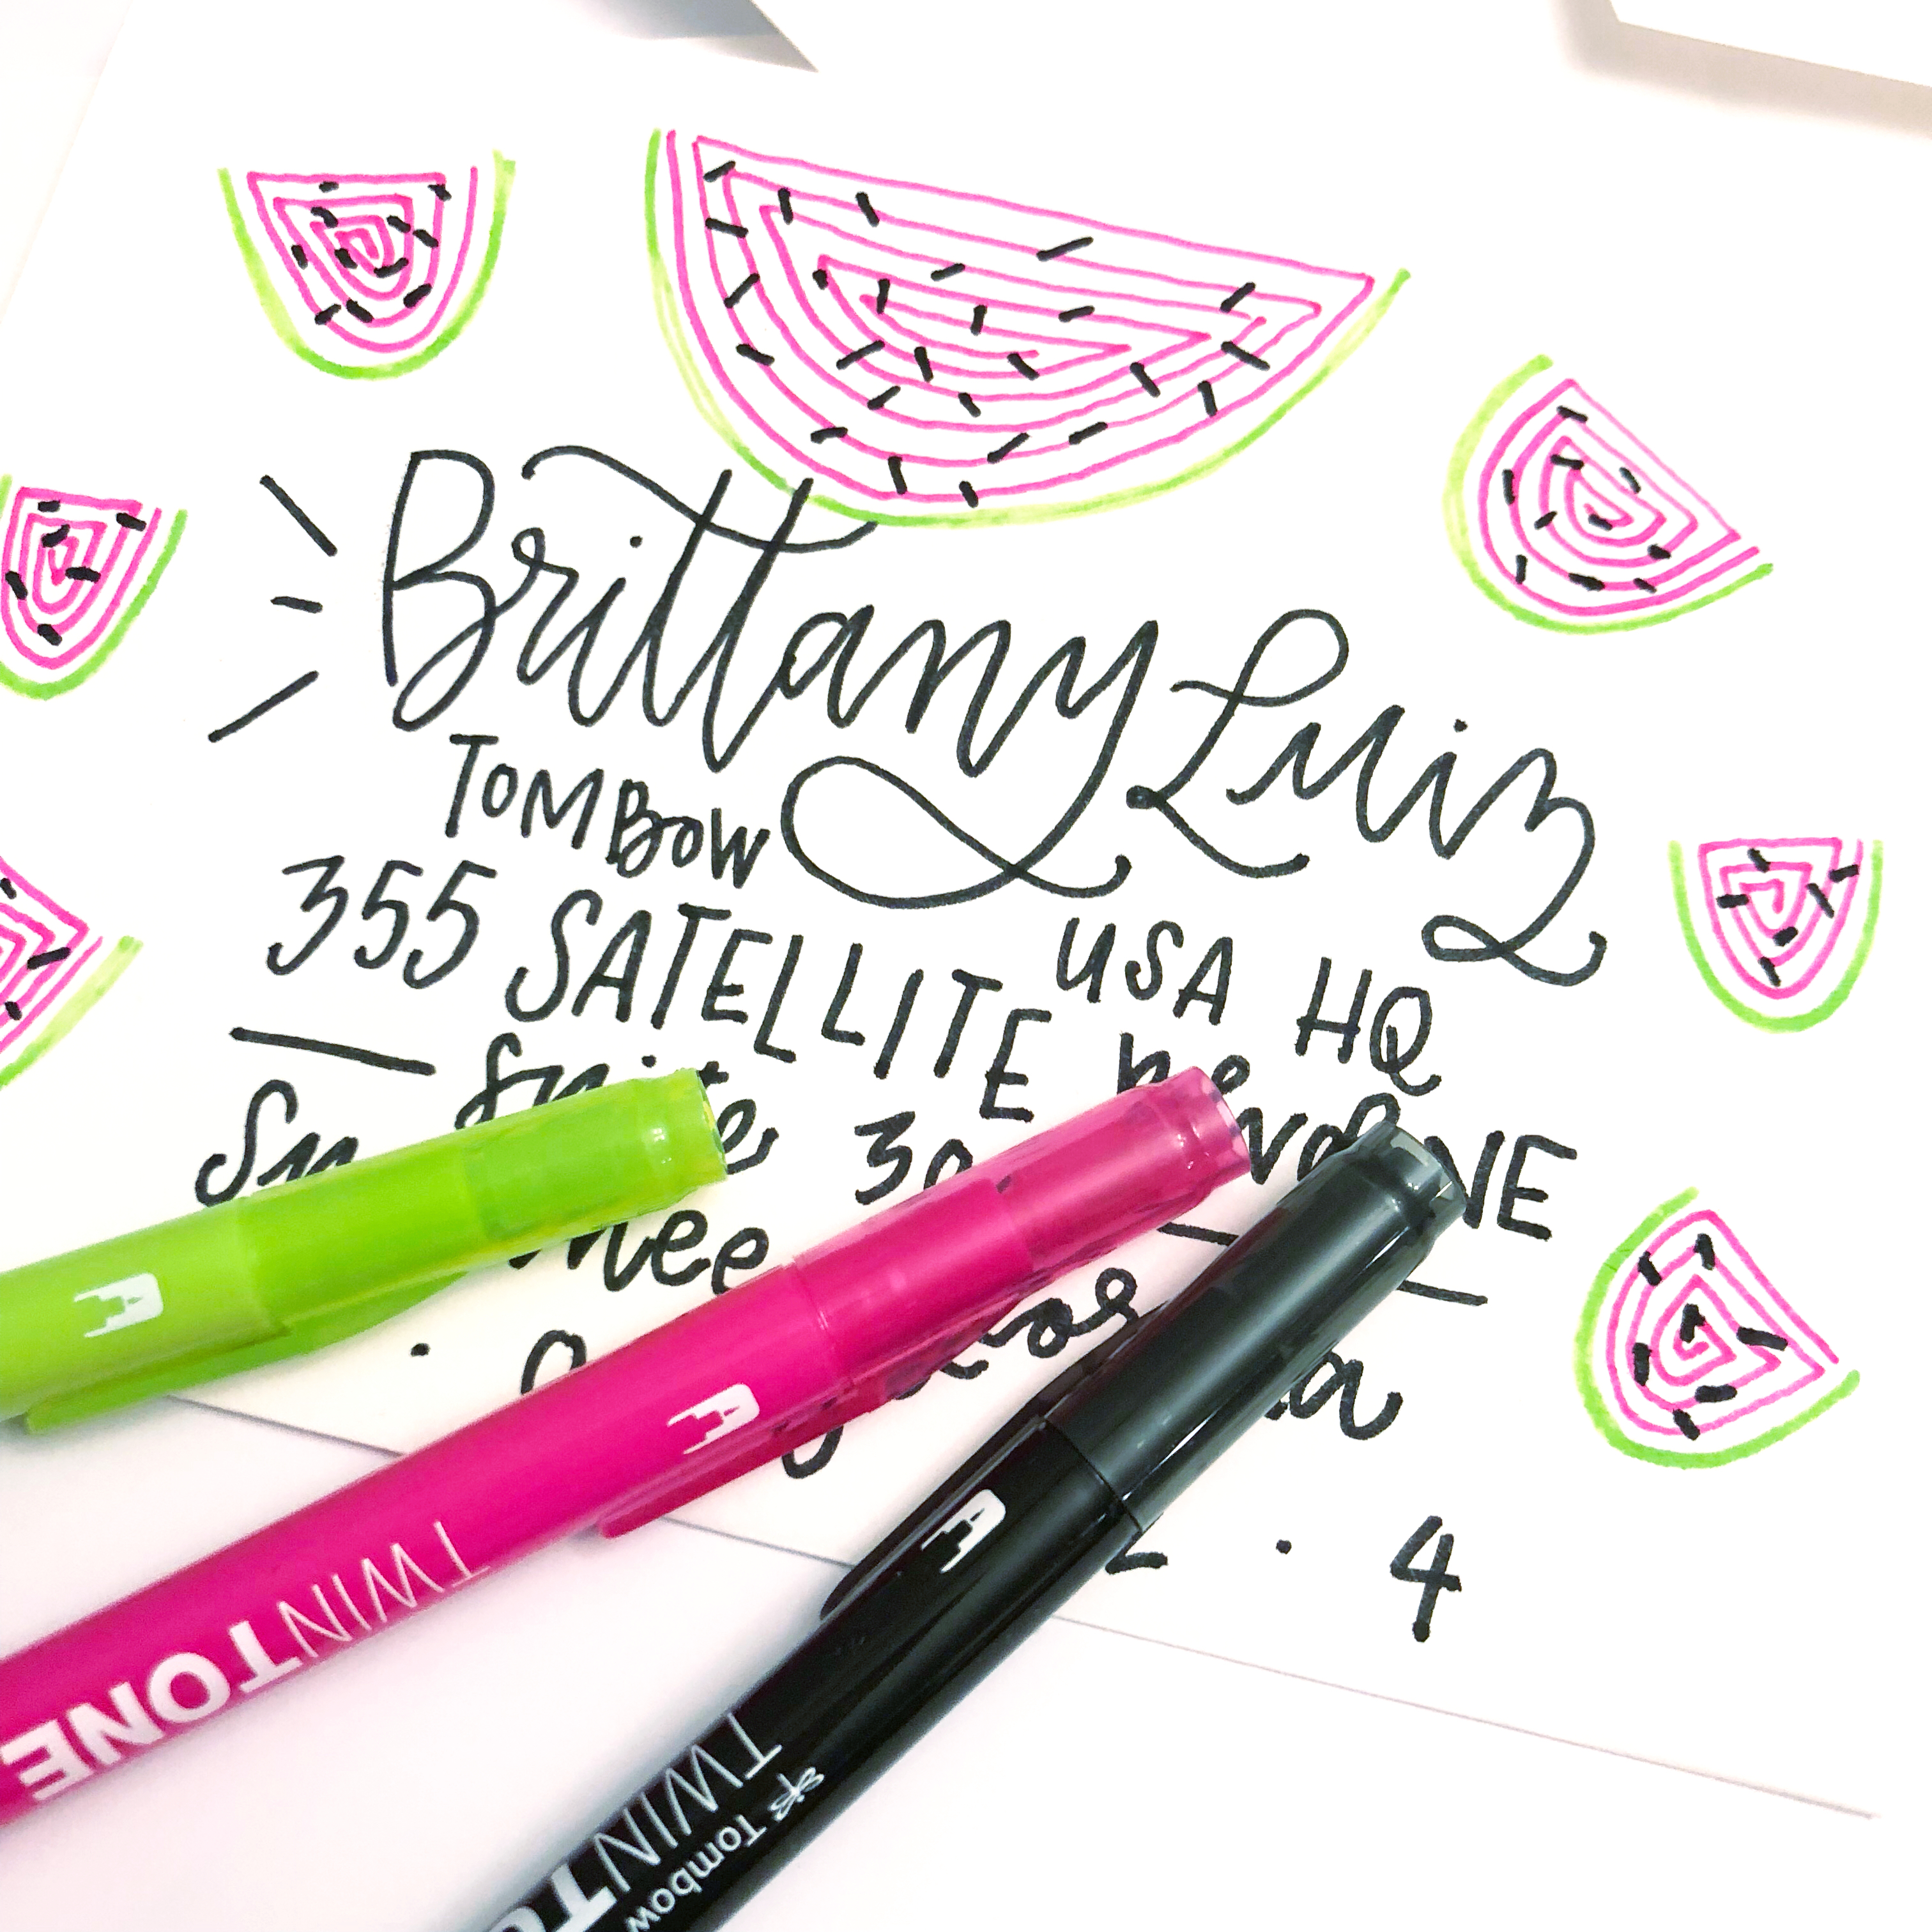 Lauren Fitzmaurice of Renmade Calligraphy (renmadecalligraphy.com) shows you how to create bright happy mail with fun line doodles using Tombow Twintones.